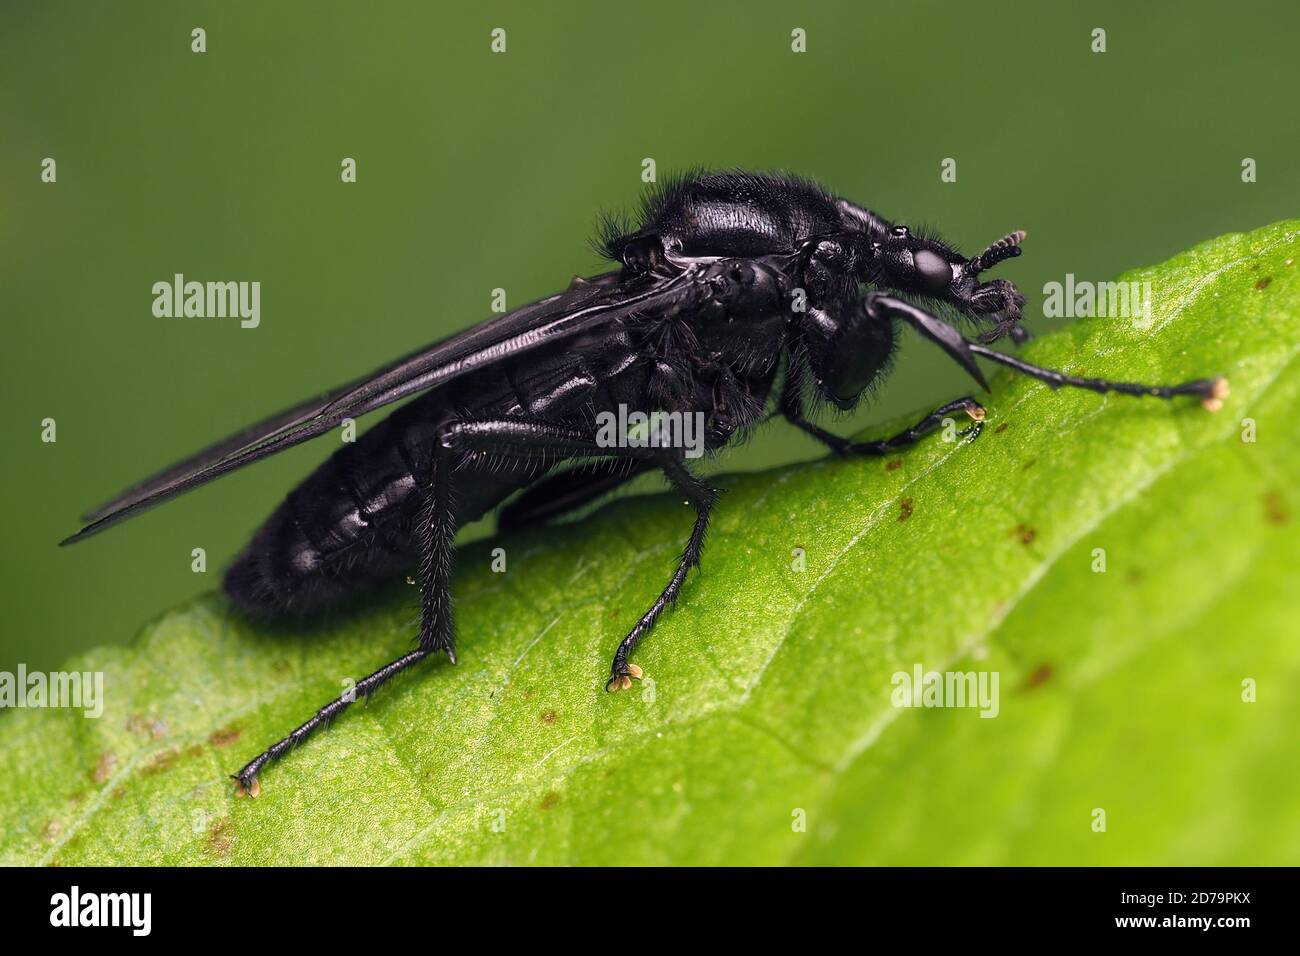 Female St Mark's Fly (Bibio marci) perched on plant leaf. Stock Photo